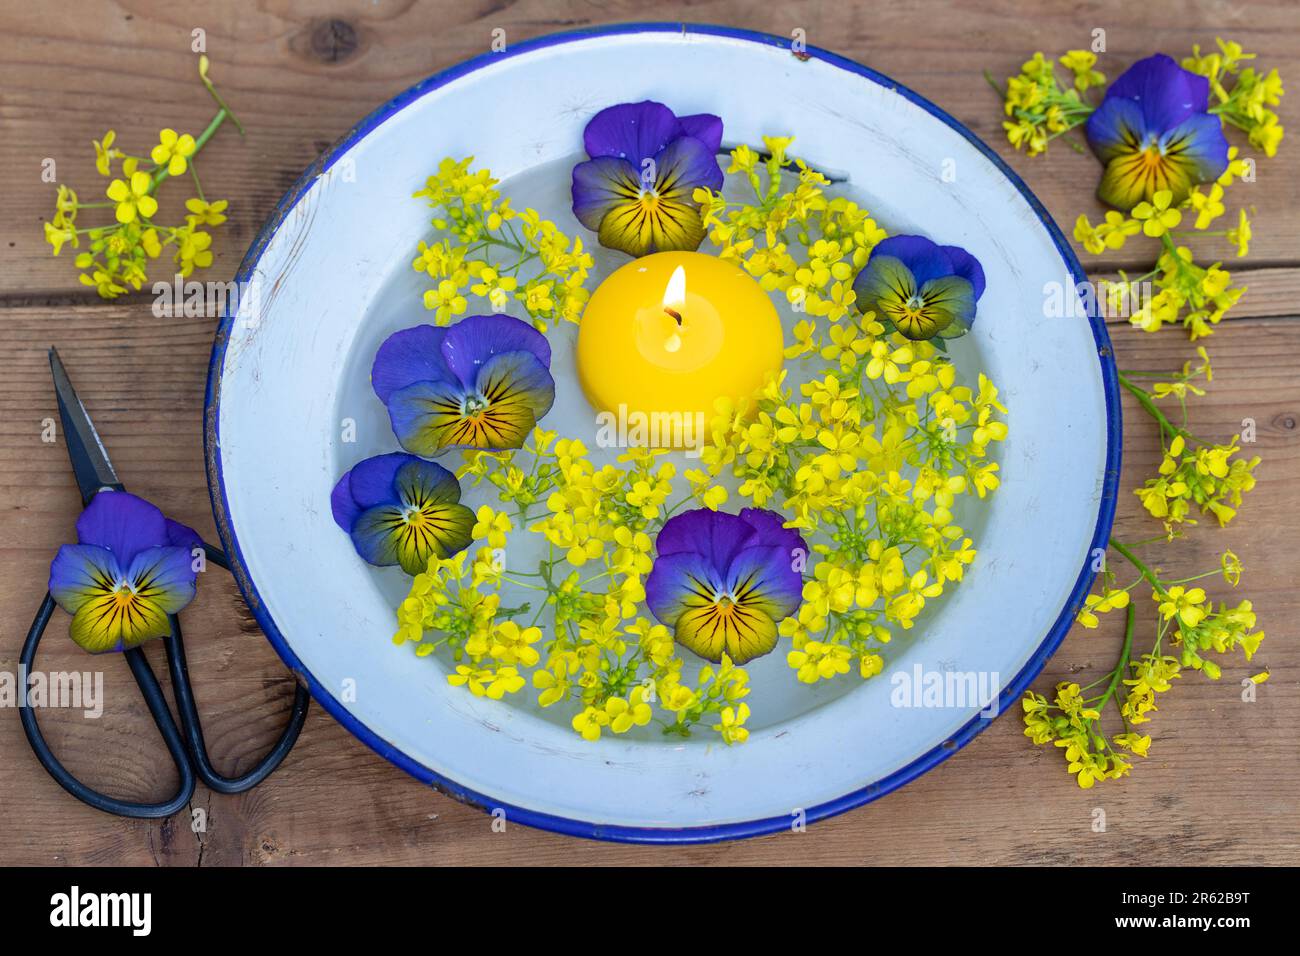 decoration with floating candle, viola flowers and yellow bedstraw in vintage enamel plate Stock Photo